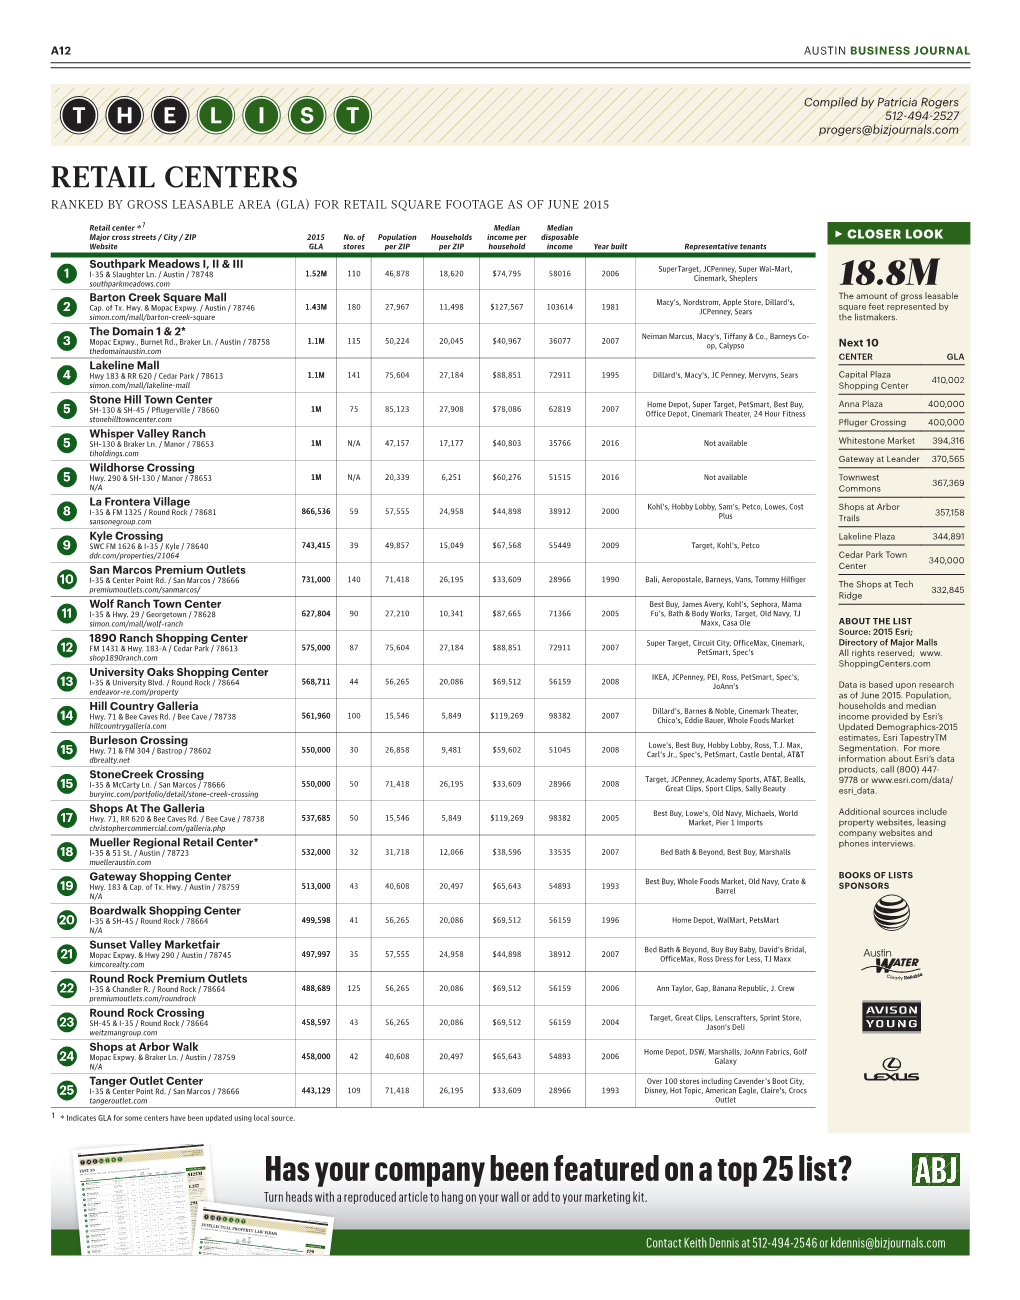 Retail Centers Ranked by Gross Leasable Area (Gla) for Retail Square Footage As of June 2015